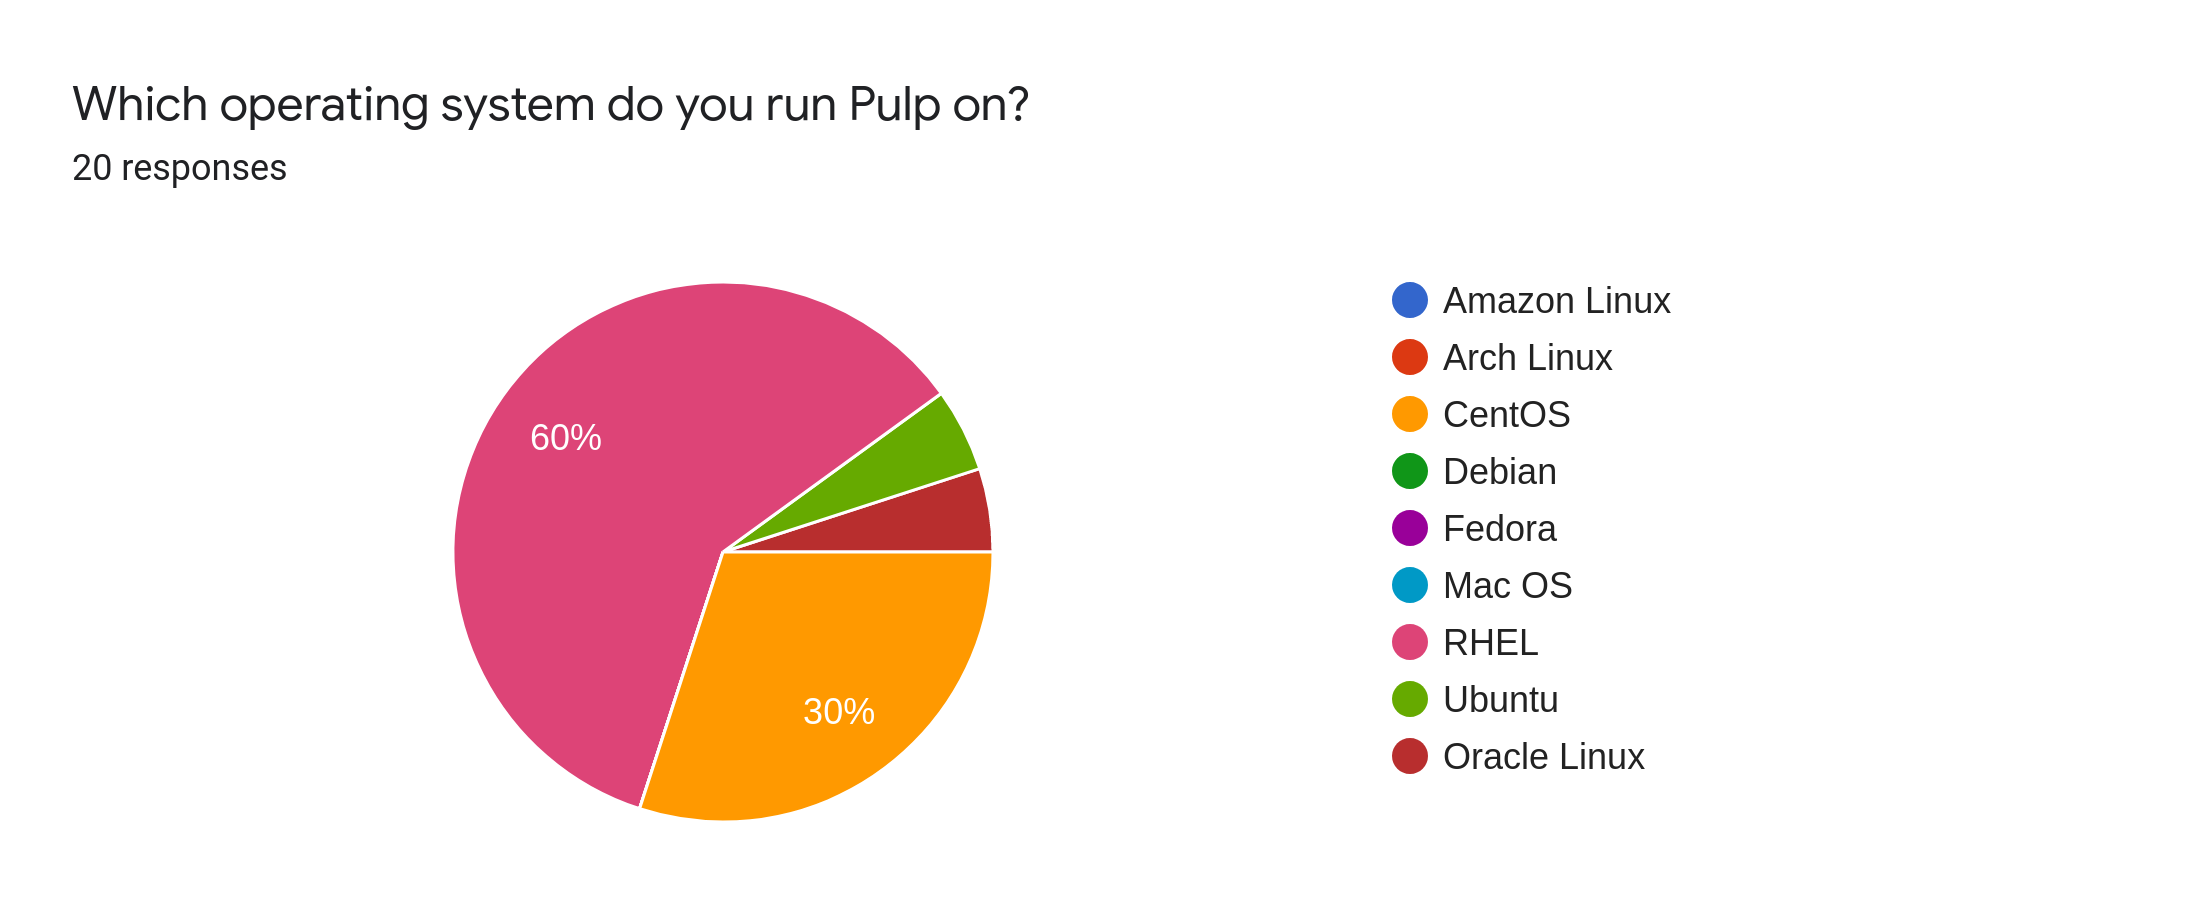 Which operating system have you installed Pulp on?